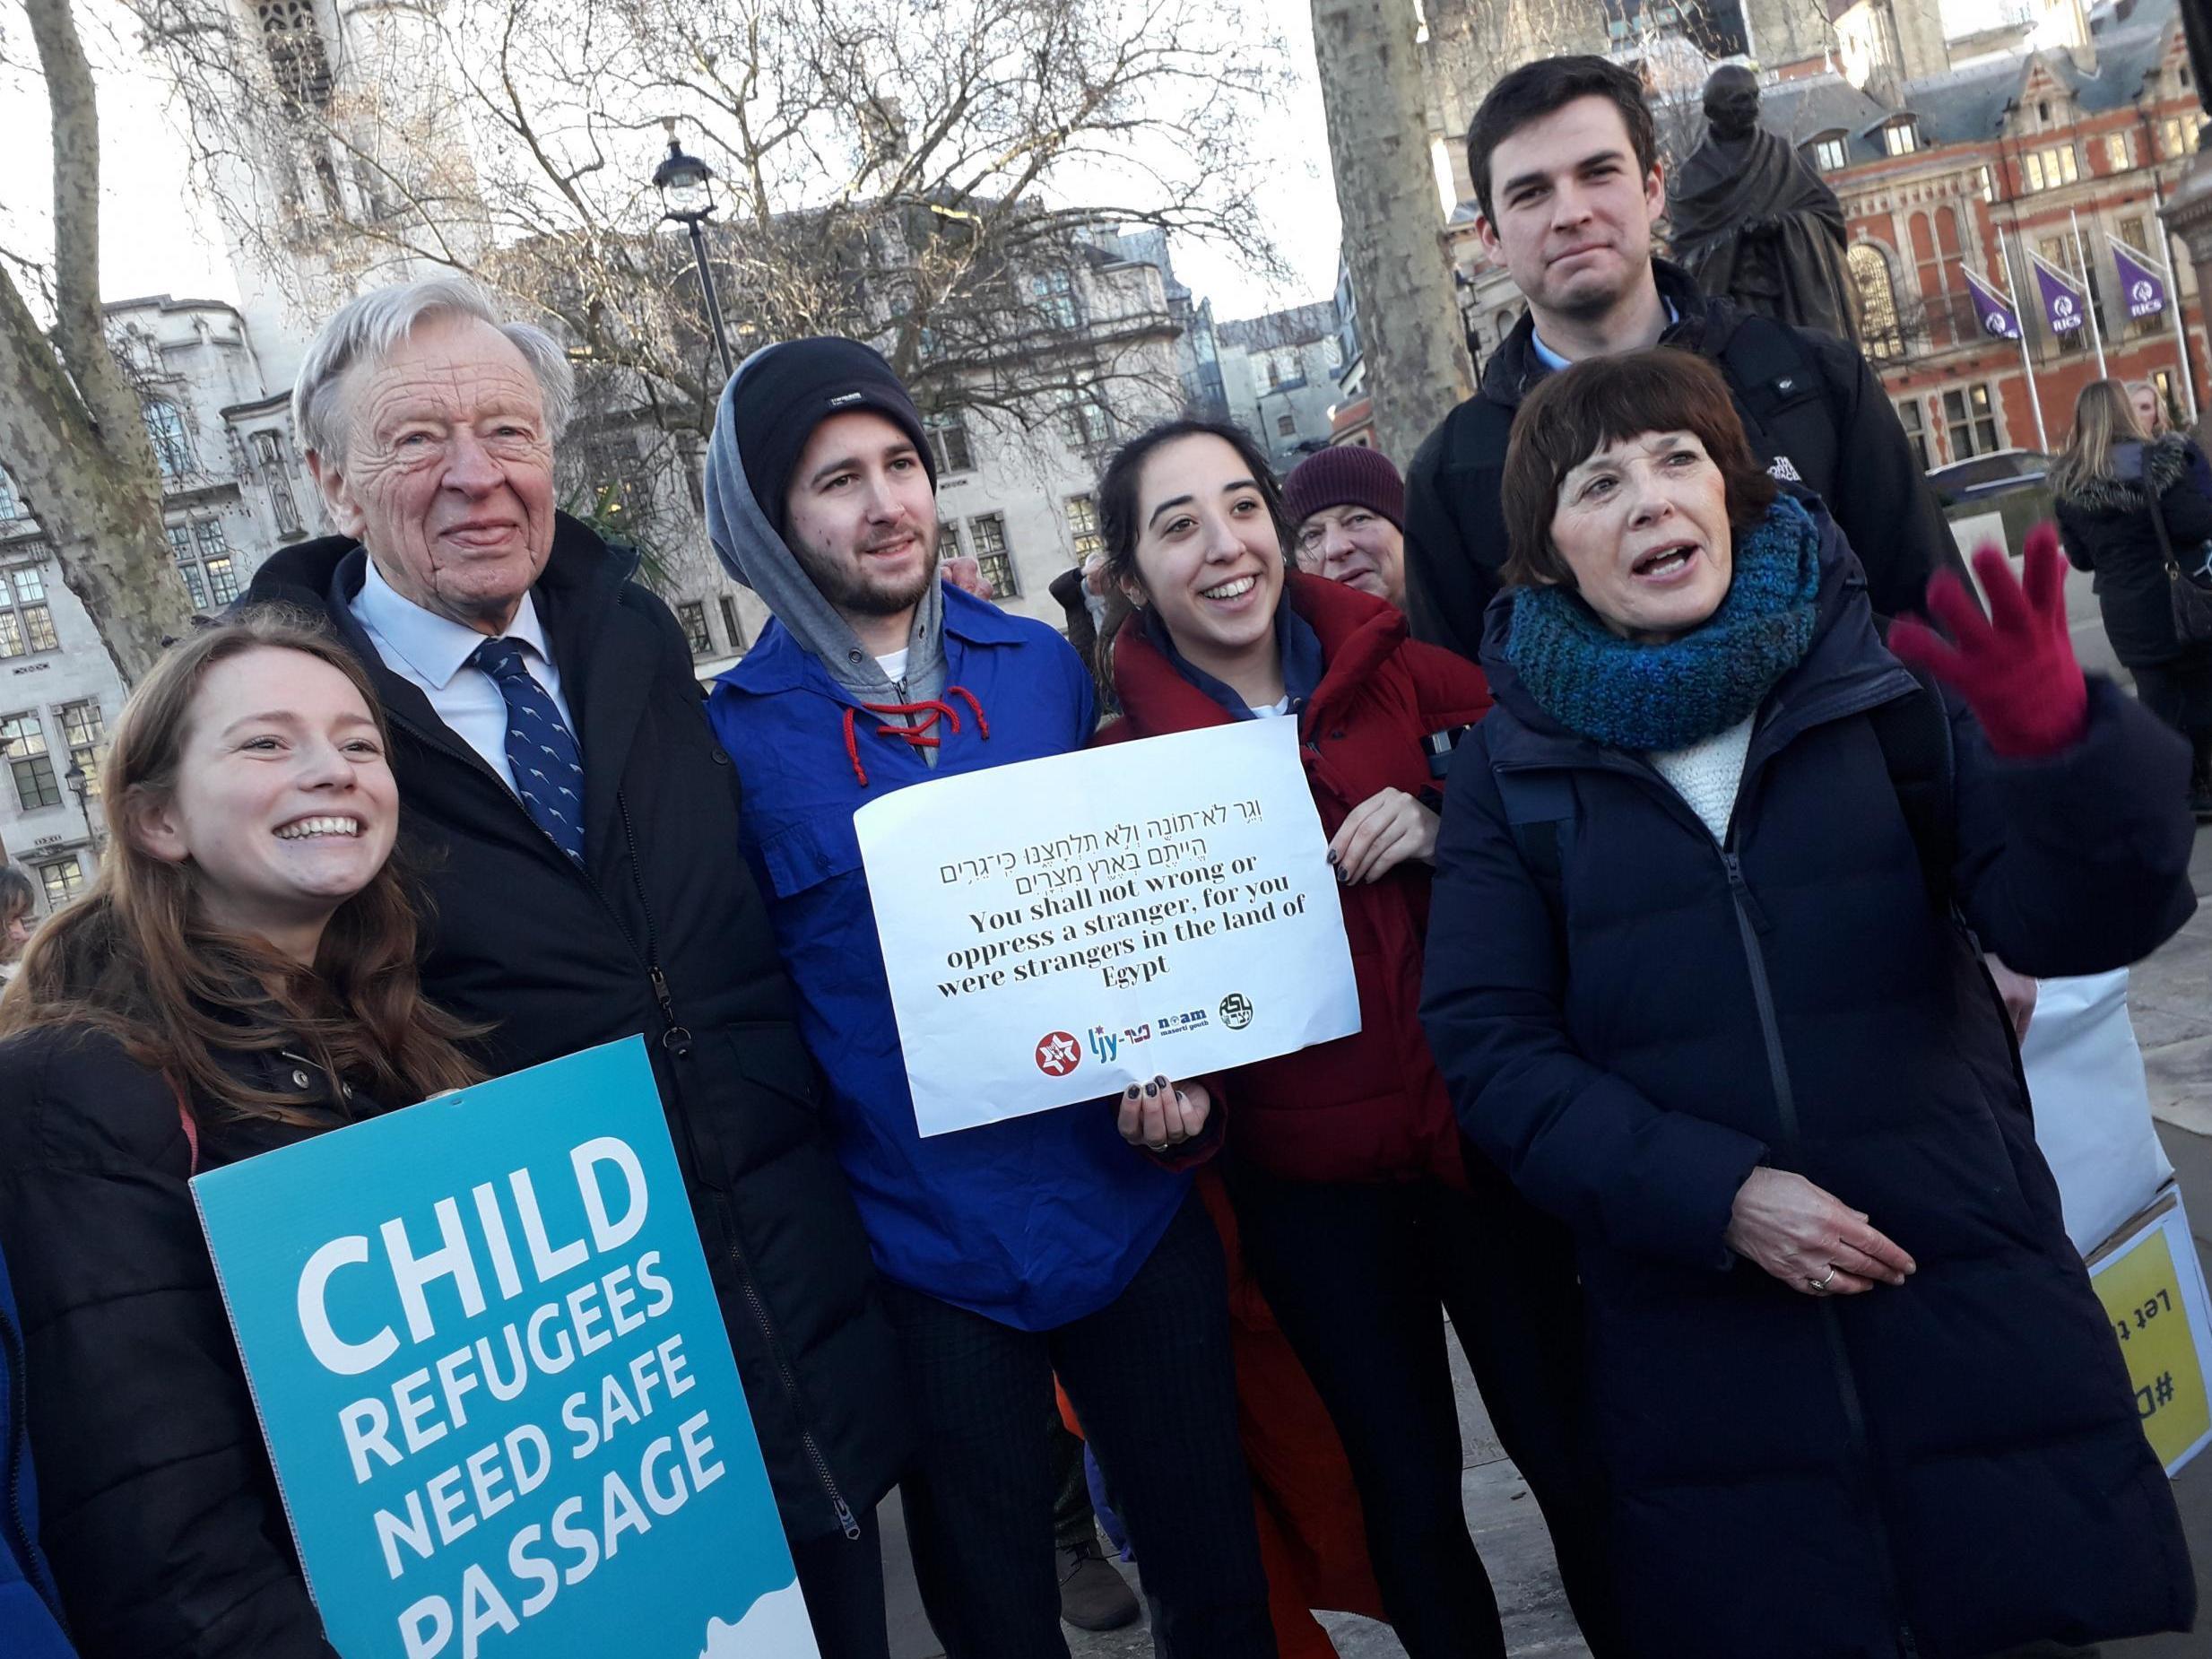 Lord Dubs (second from left) joins campaigners for child refugees’ rights